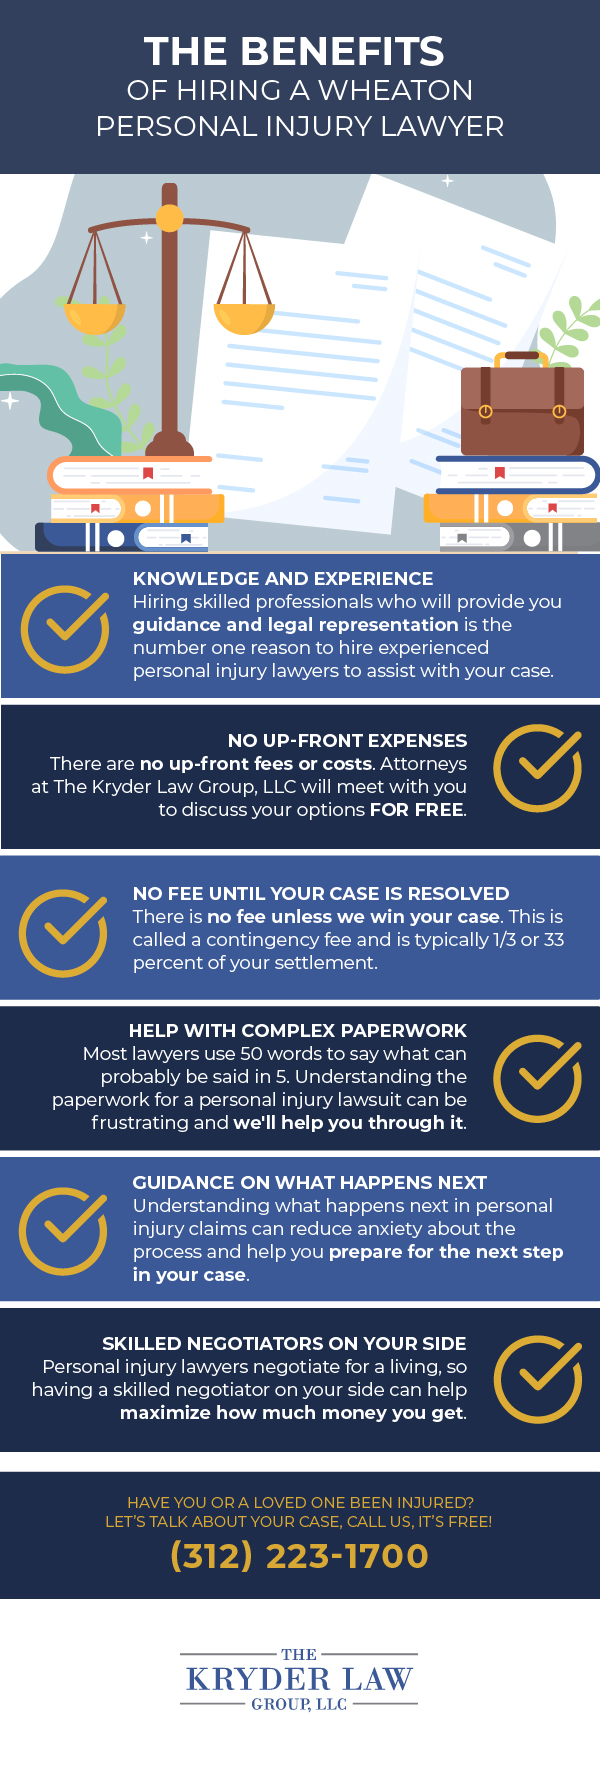 Benefits of Hiring a Wheaton Personal Injury Lawyer Infographic